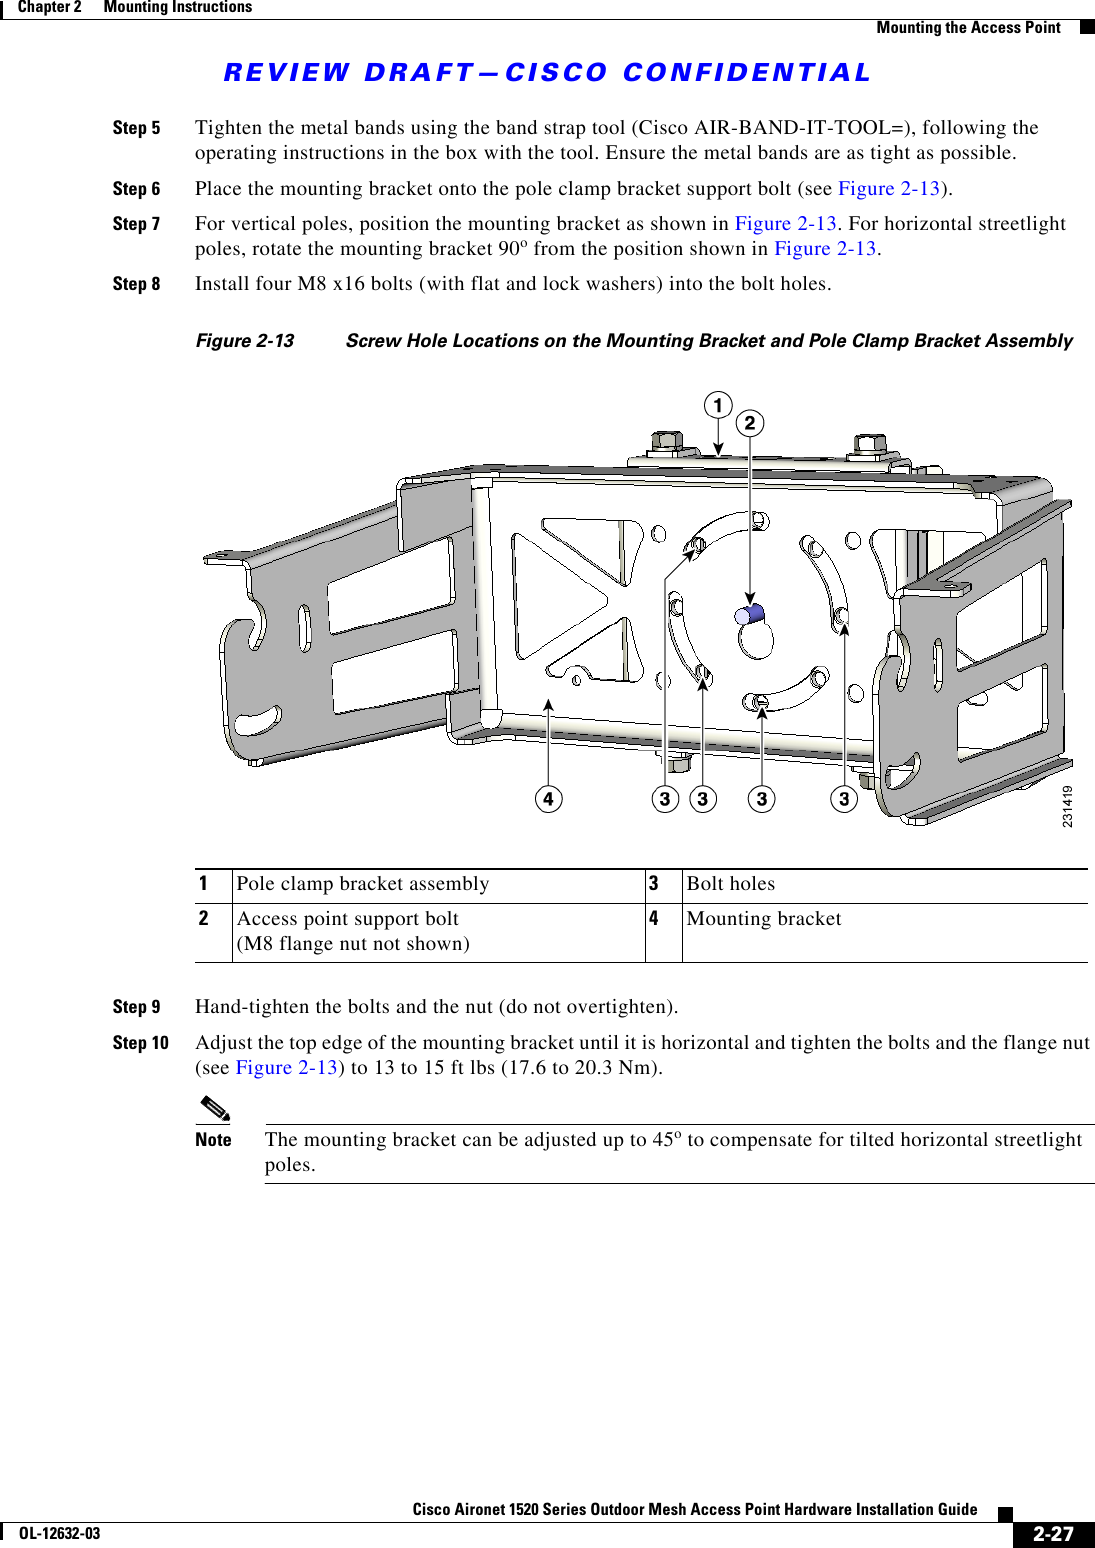 REVIEW DRAFT—CISCO CONFIDENTIAL2-27Cisco Aironet 1520 Series Outdoor Mesh Access Point Hardware Installation GuideOL-12632-03Chapter 2      Mounting Instructions  Mounting the Access PointStep 5 Tighten the metal bands using the band strap tool (Cisco AIR-BAND-IT-TOOL=), following the operating instructions in the box with the tool. Ensure the metal bands are as tight as possible.Step 6 Place the mounting bracket onto the pole clamp bracket support bolt (see Figure 2-13).Step 7 For vertical poles, position the mounting bracket as shown in Figure 2-13. For horizontal streetlight poles, rotate the mounting bracket 90o from the position shown in Figure 2-13.Step 8 Install four M8 x16 bolts (with flat and lock washers) into the bolt holes.Figure 2-13 Screw Hole Locations on the Mounting Bracket and Pole Clamp Bracket AssemblyStep 9 Hand-tighten the bolts and the nut (do not overtighten).Step 10 Adjust the top edge of the mounting bracket until it is horizontal and tighten the bolts and the flange nut (see Figure 2-13) to 13 to 15 ft lbs (17.6 to 20.3 Nm).Note The mounting bracket can be adjusted up to 45o to compensate for tilted horizontal streetlight poles. 1Pole clamp bracket assembly 3Bolt holes 2Access point support bolt  (M8 flange nut not shown)4Mounting bracket